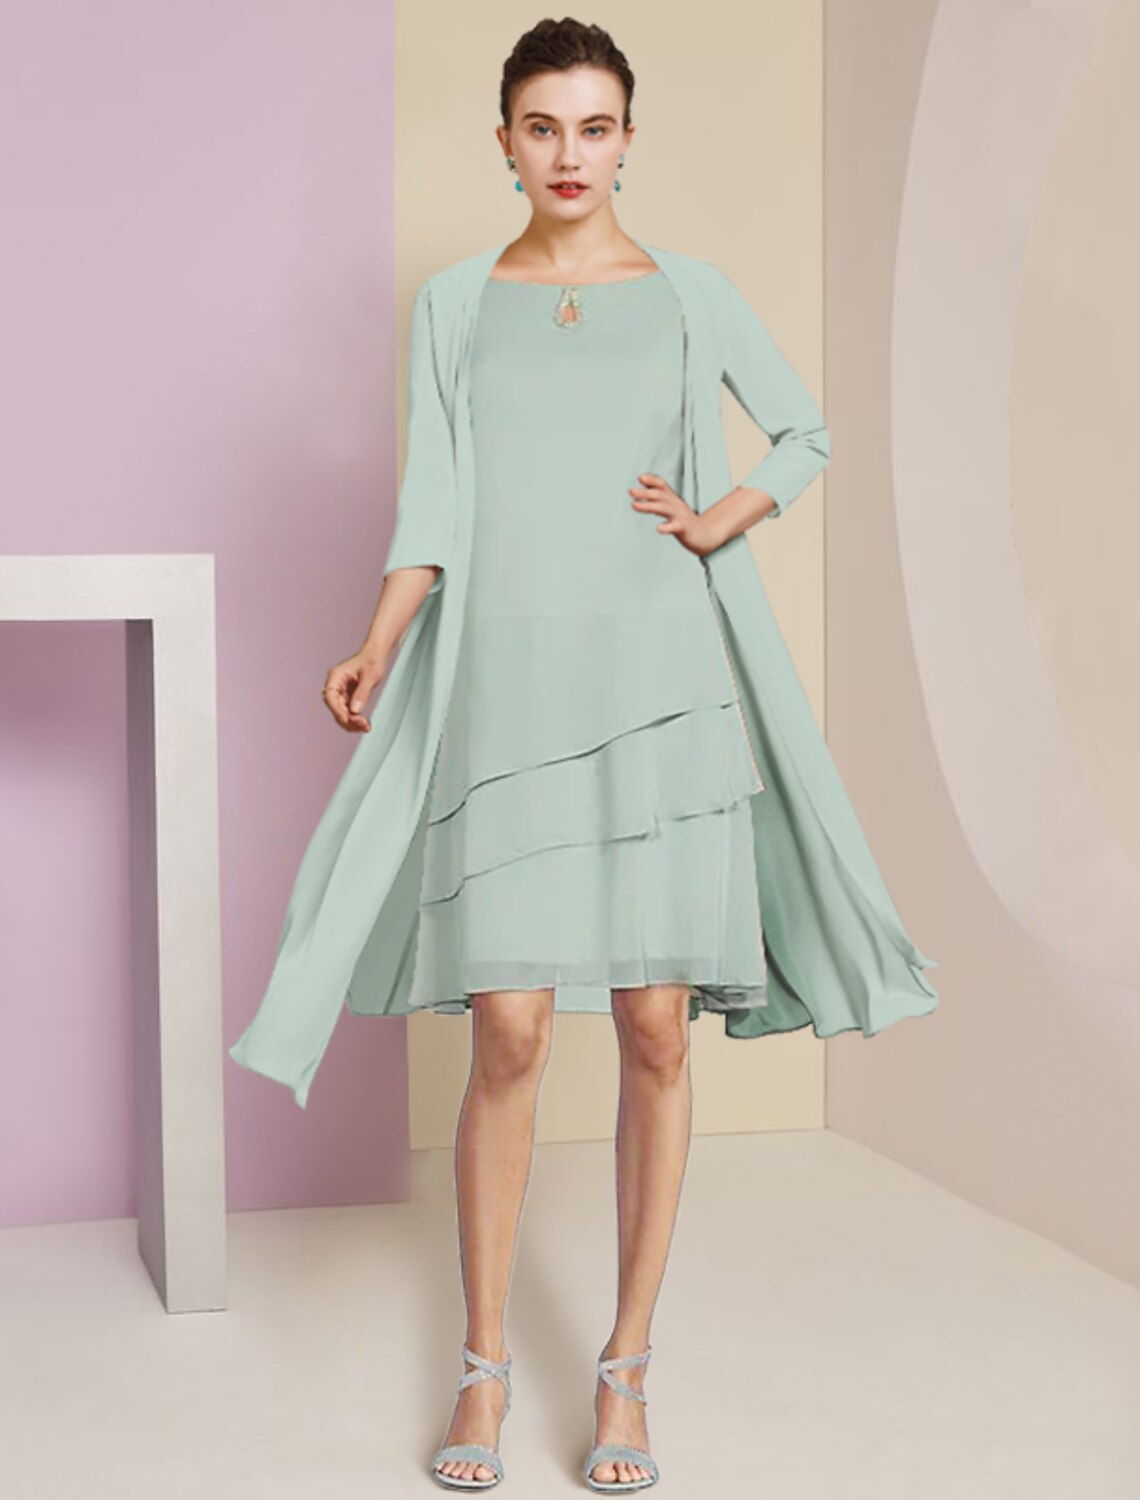 Two Piece A-Line Mother of the Bride Dress Formal Wedding Guest Elegant Scoop Neck Knee Length Chiffon 3/4 Length Sleeve with Tier